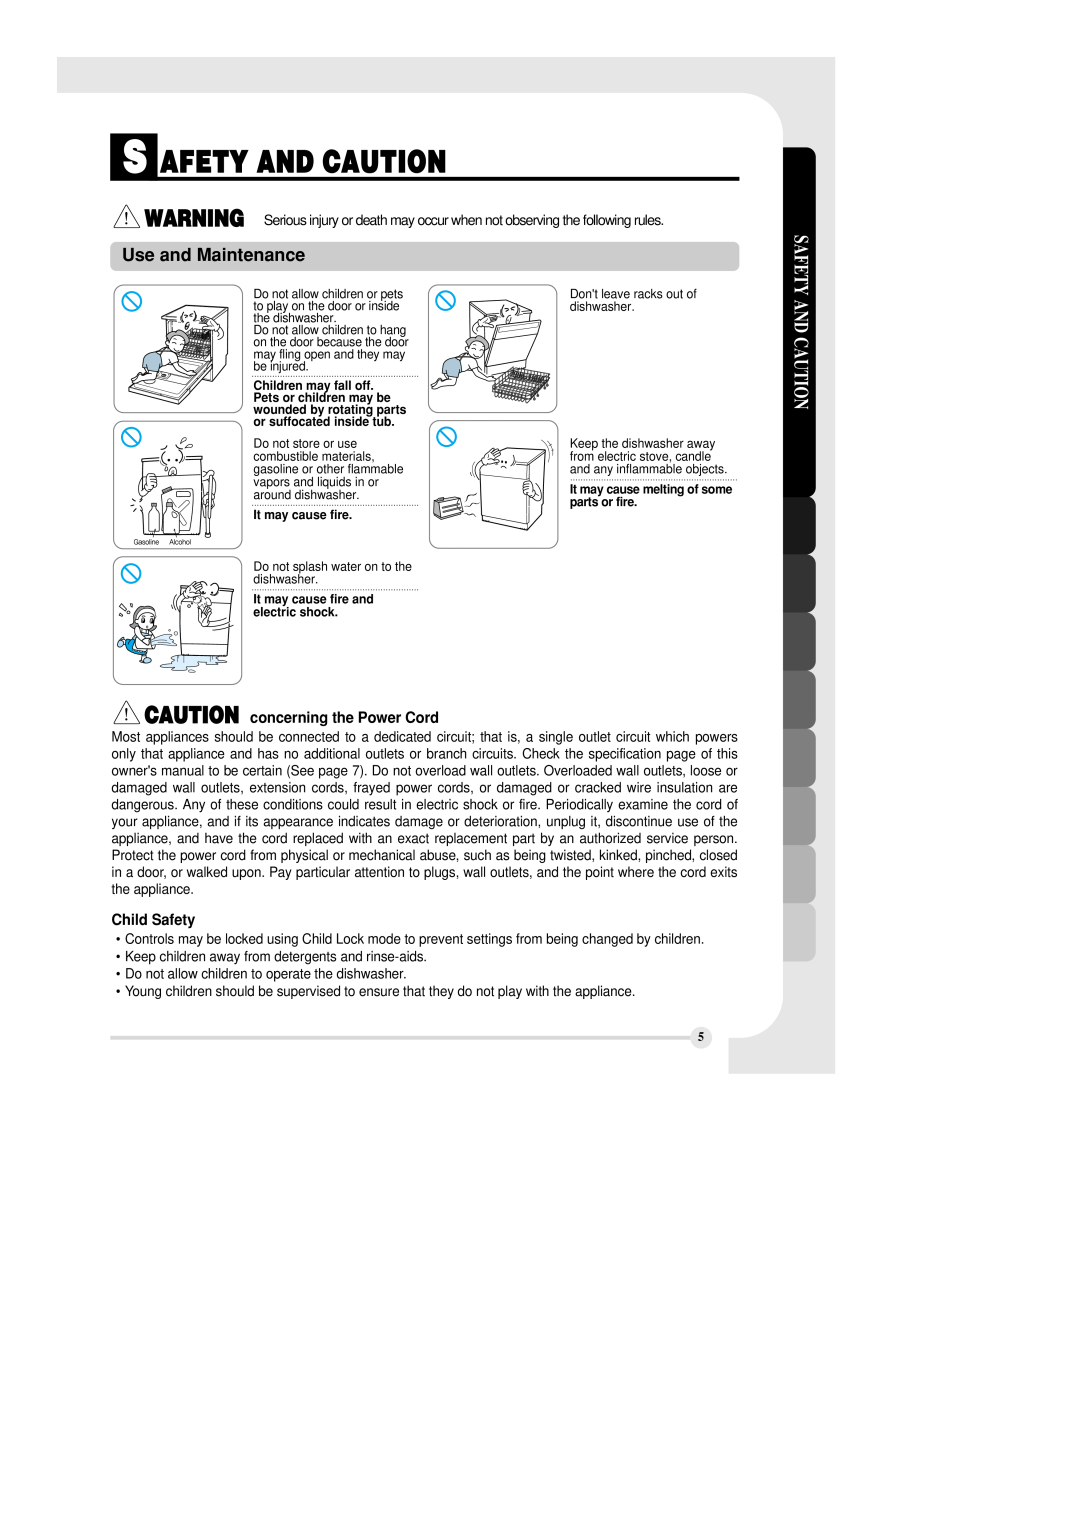 LG Electronics LDF6810ST manual Use and Maintenance, S Afety And Caution, CAUTION concerning the Power Cord, Child Safety 